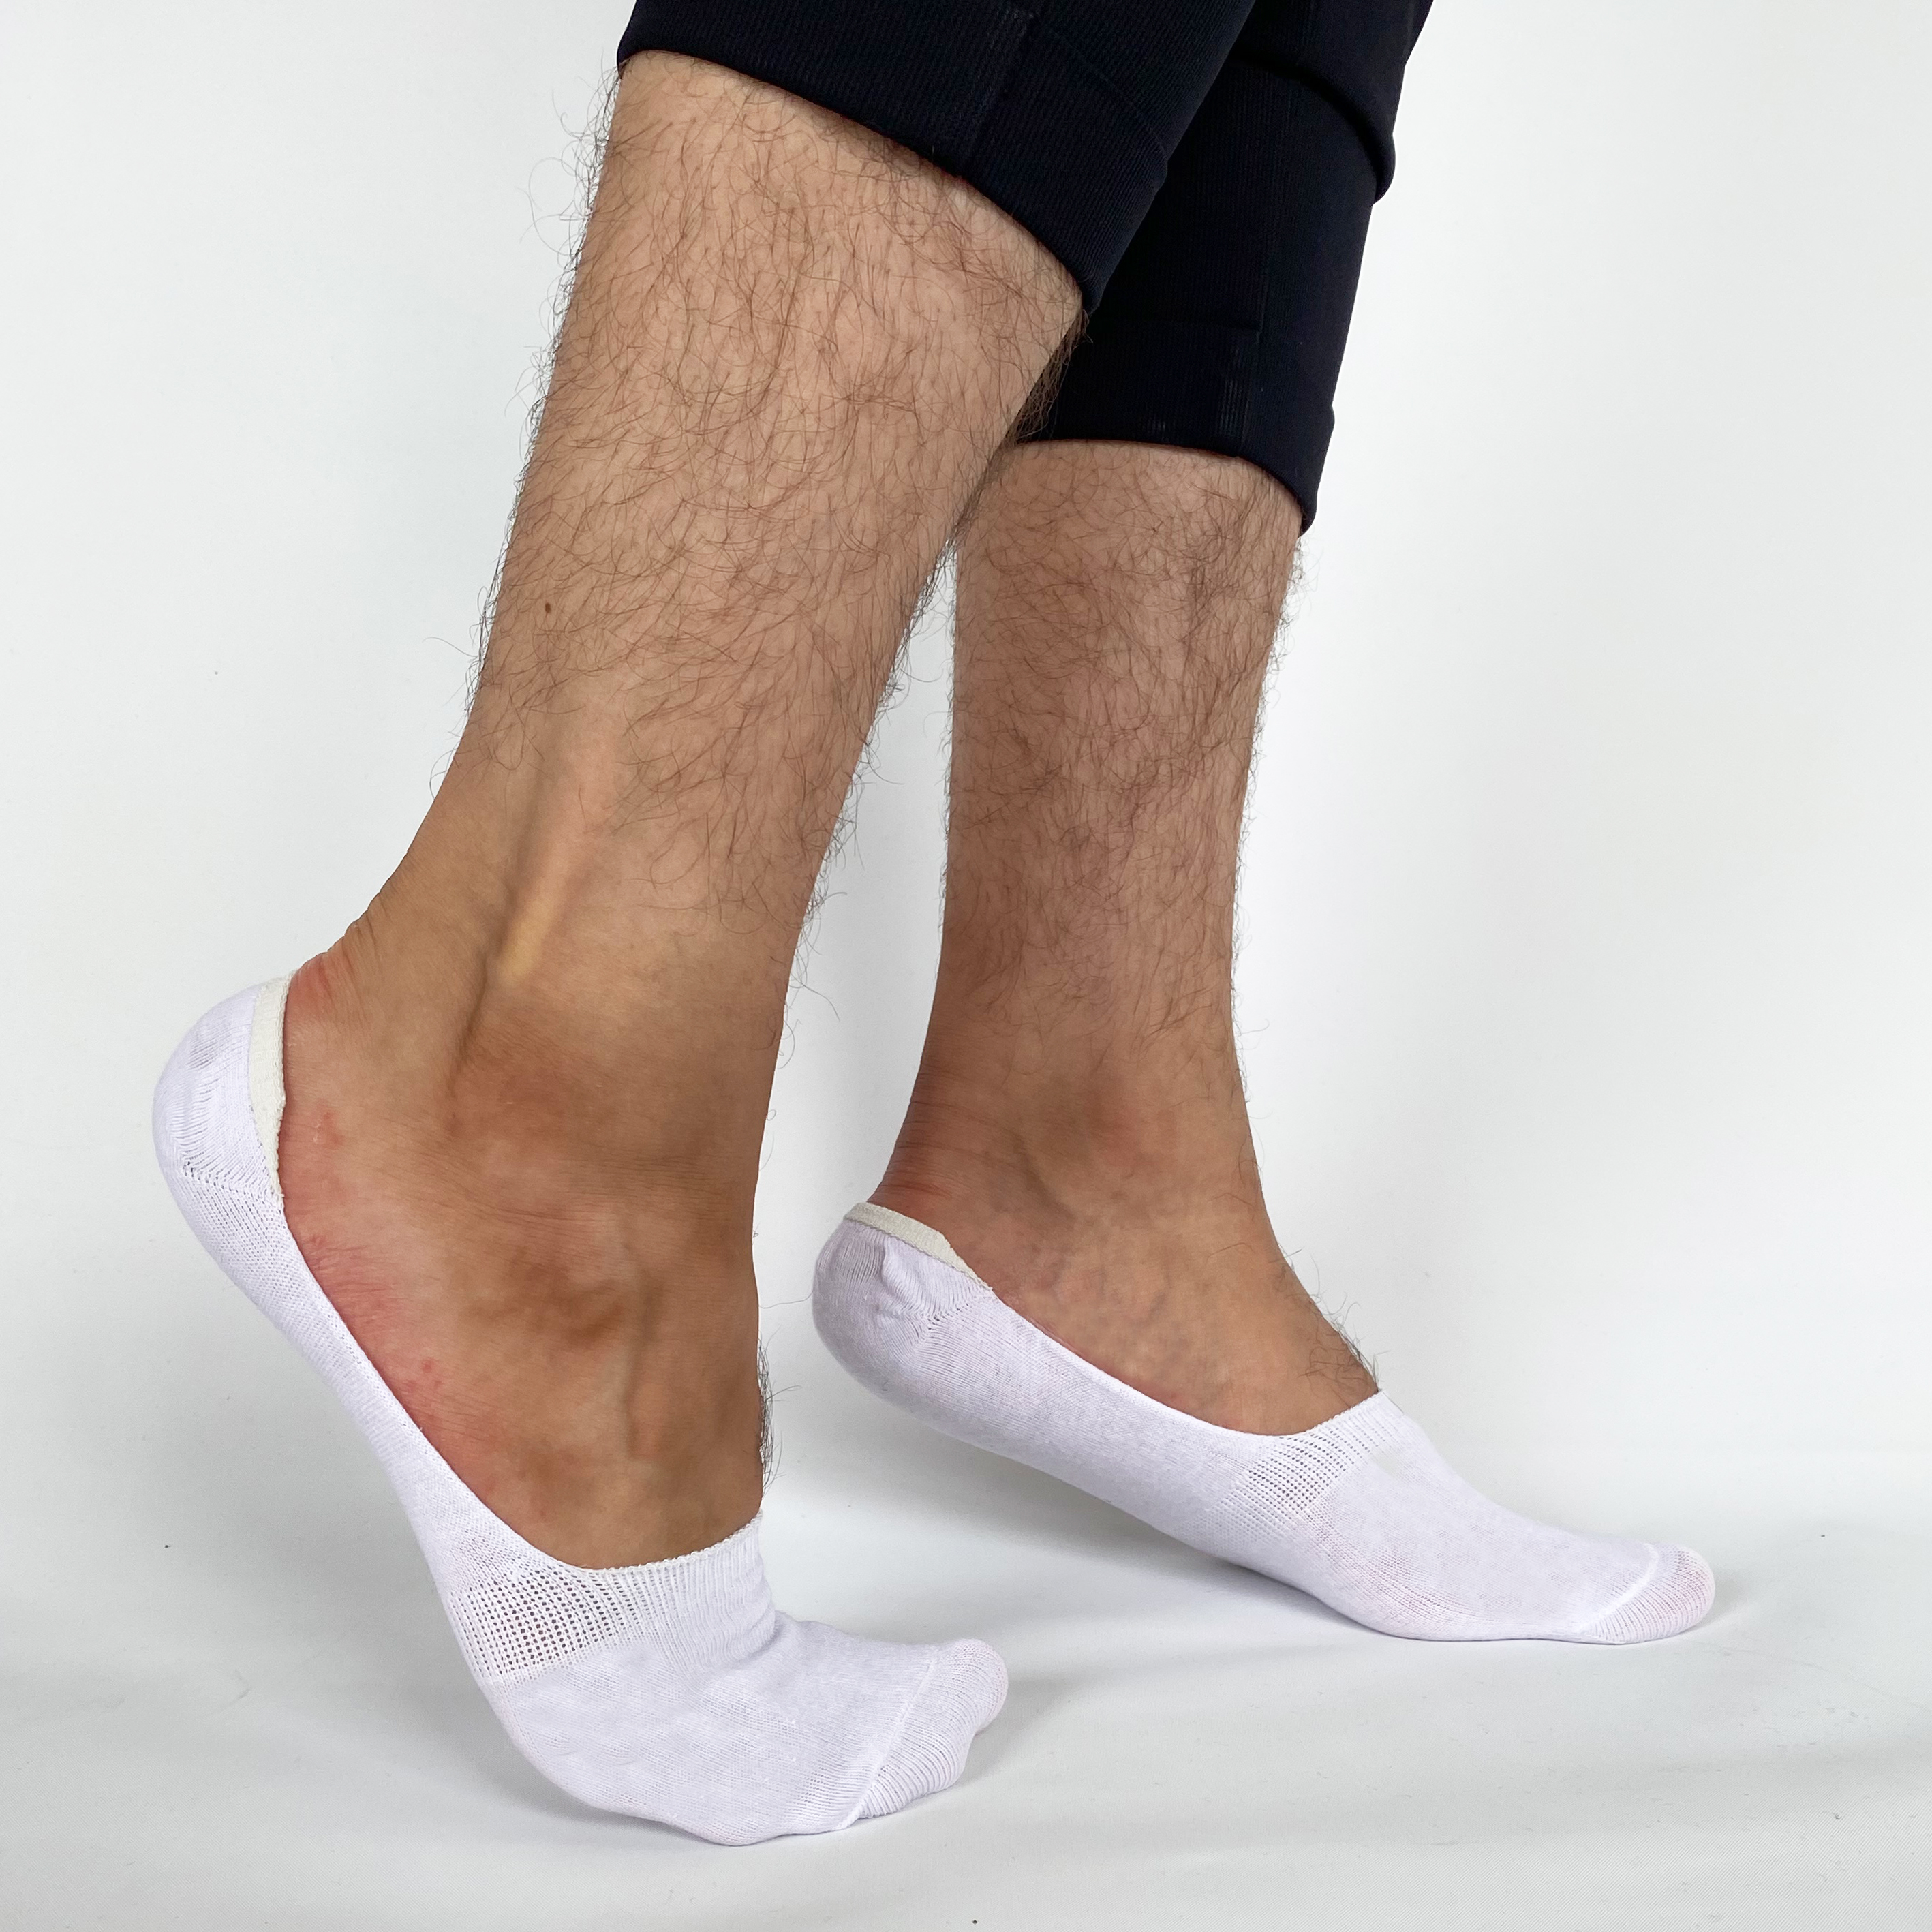 Mens Invisible Trainer Socks 5 Pack Hidden Socks Cotton Rich No Show Size  6-11